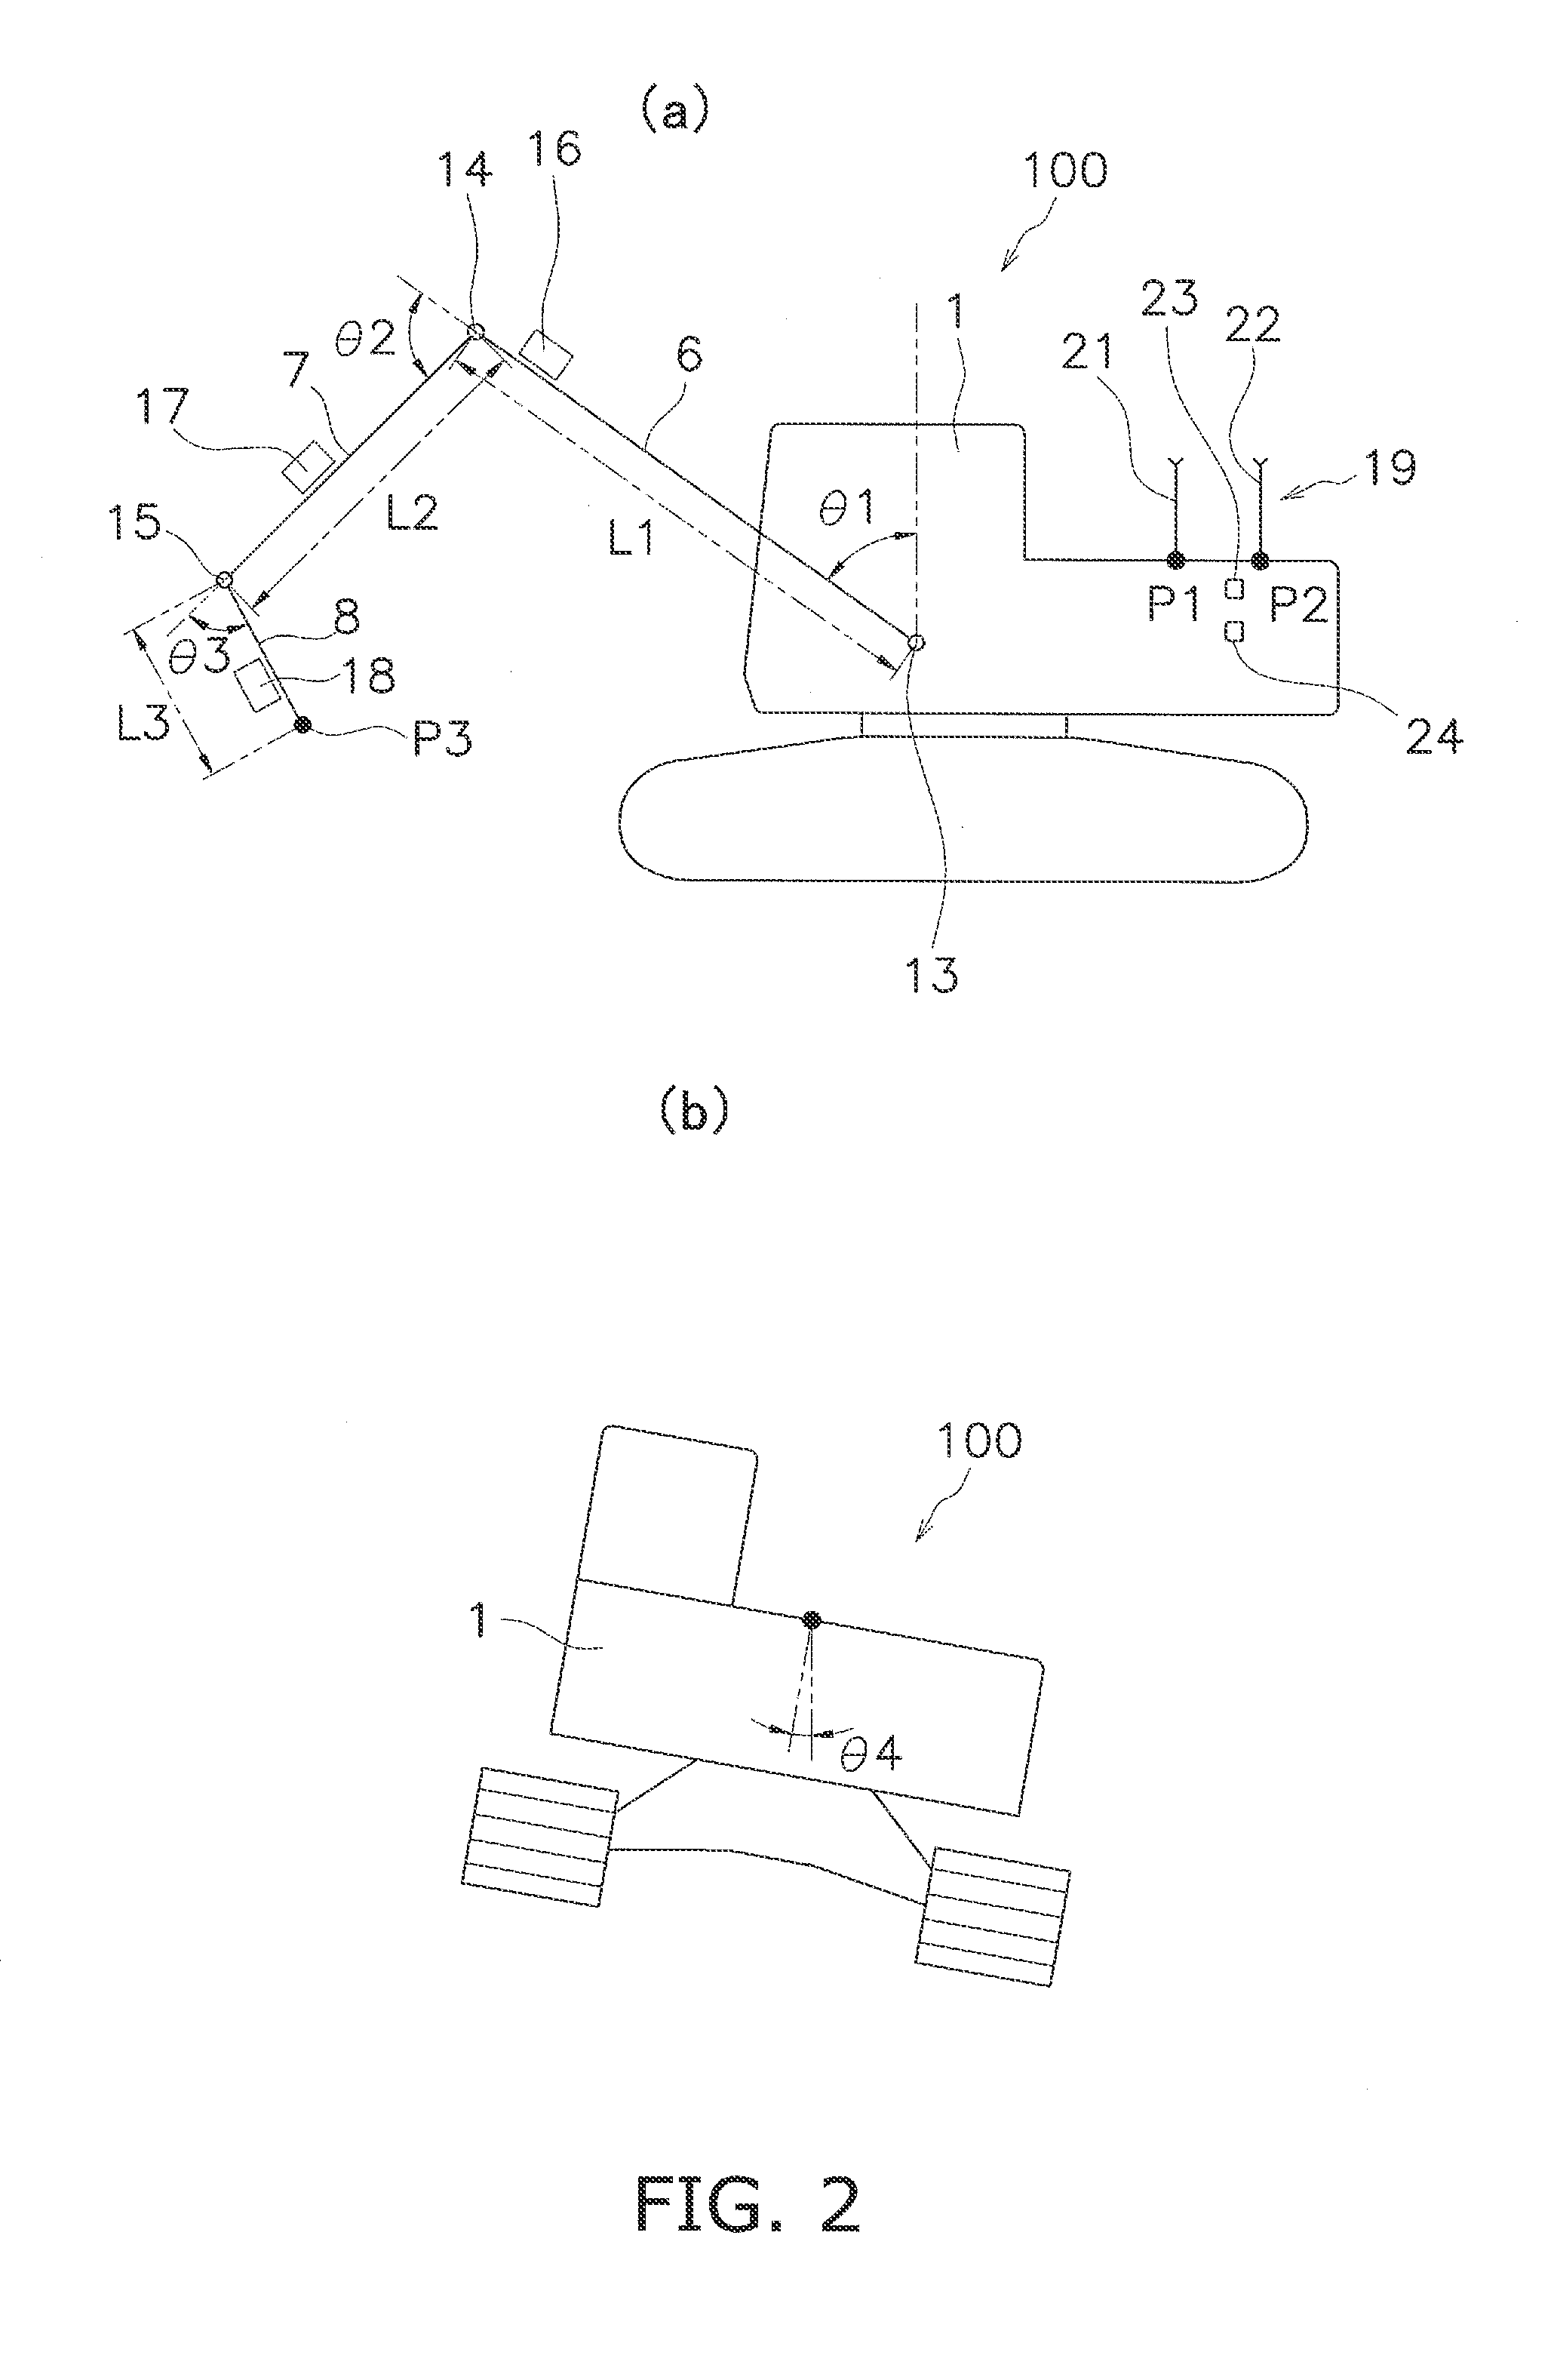 Display system in an excavator and method for controlling same